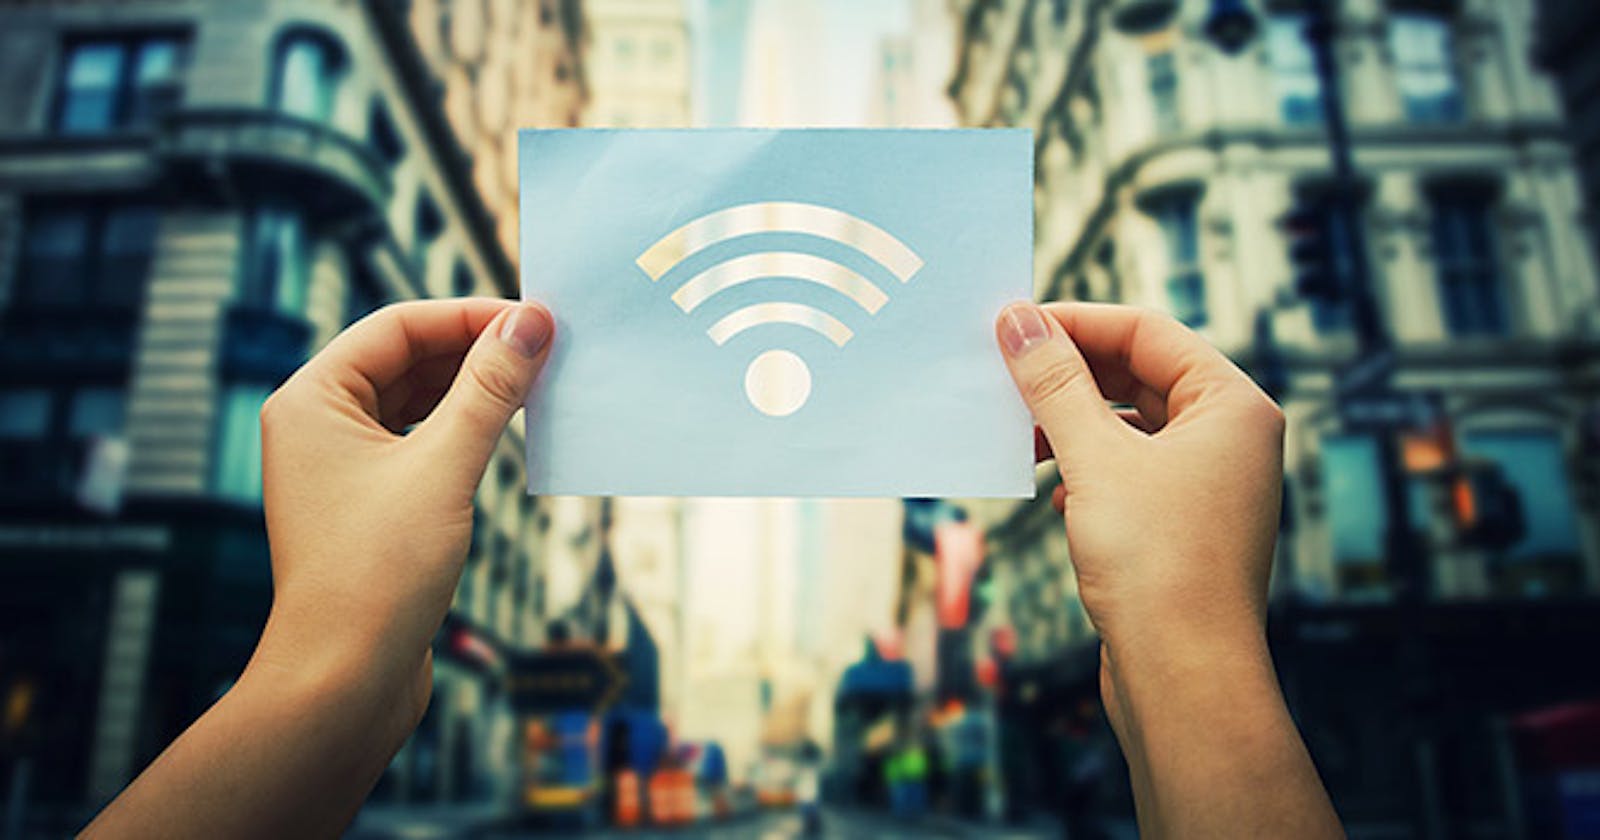 How to Avoid Public Wi-Fi Security Risks